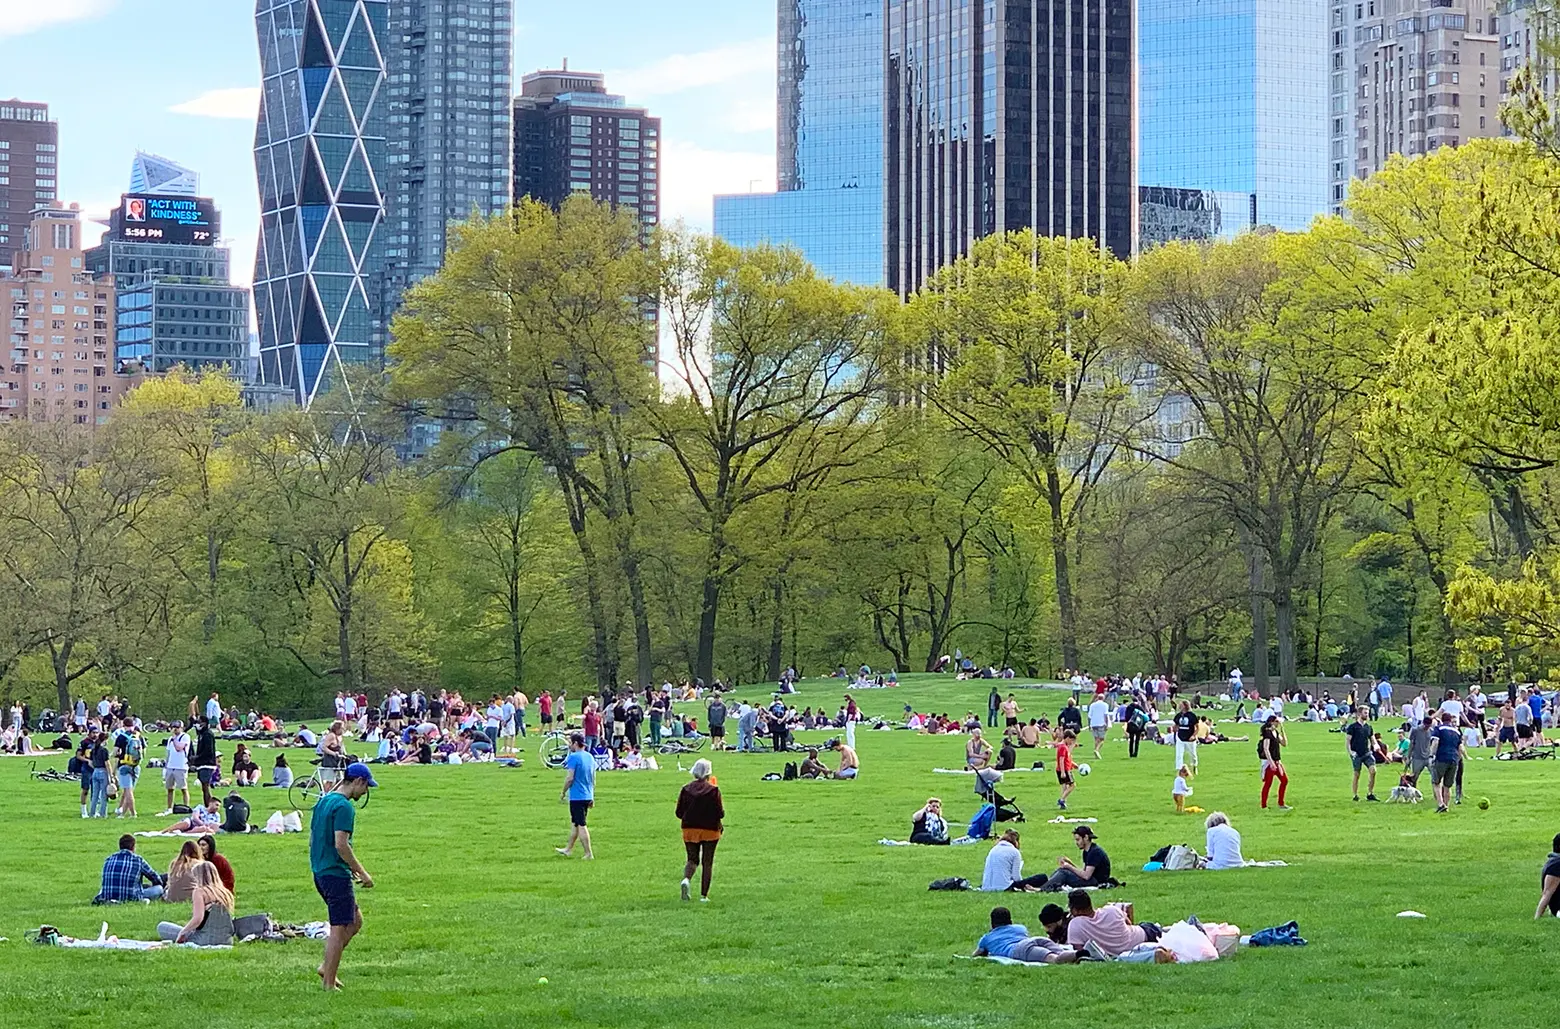 sheep meadow, central park, social distancing parks